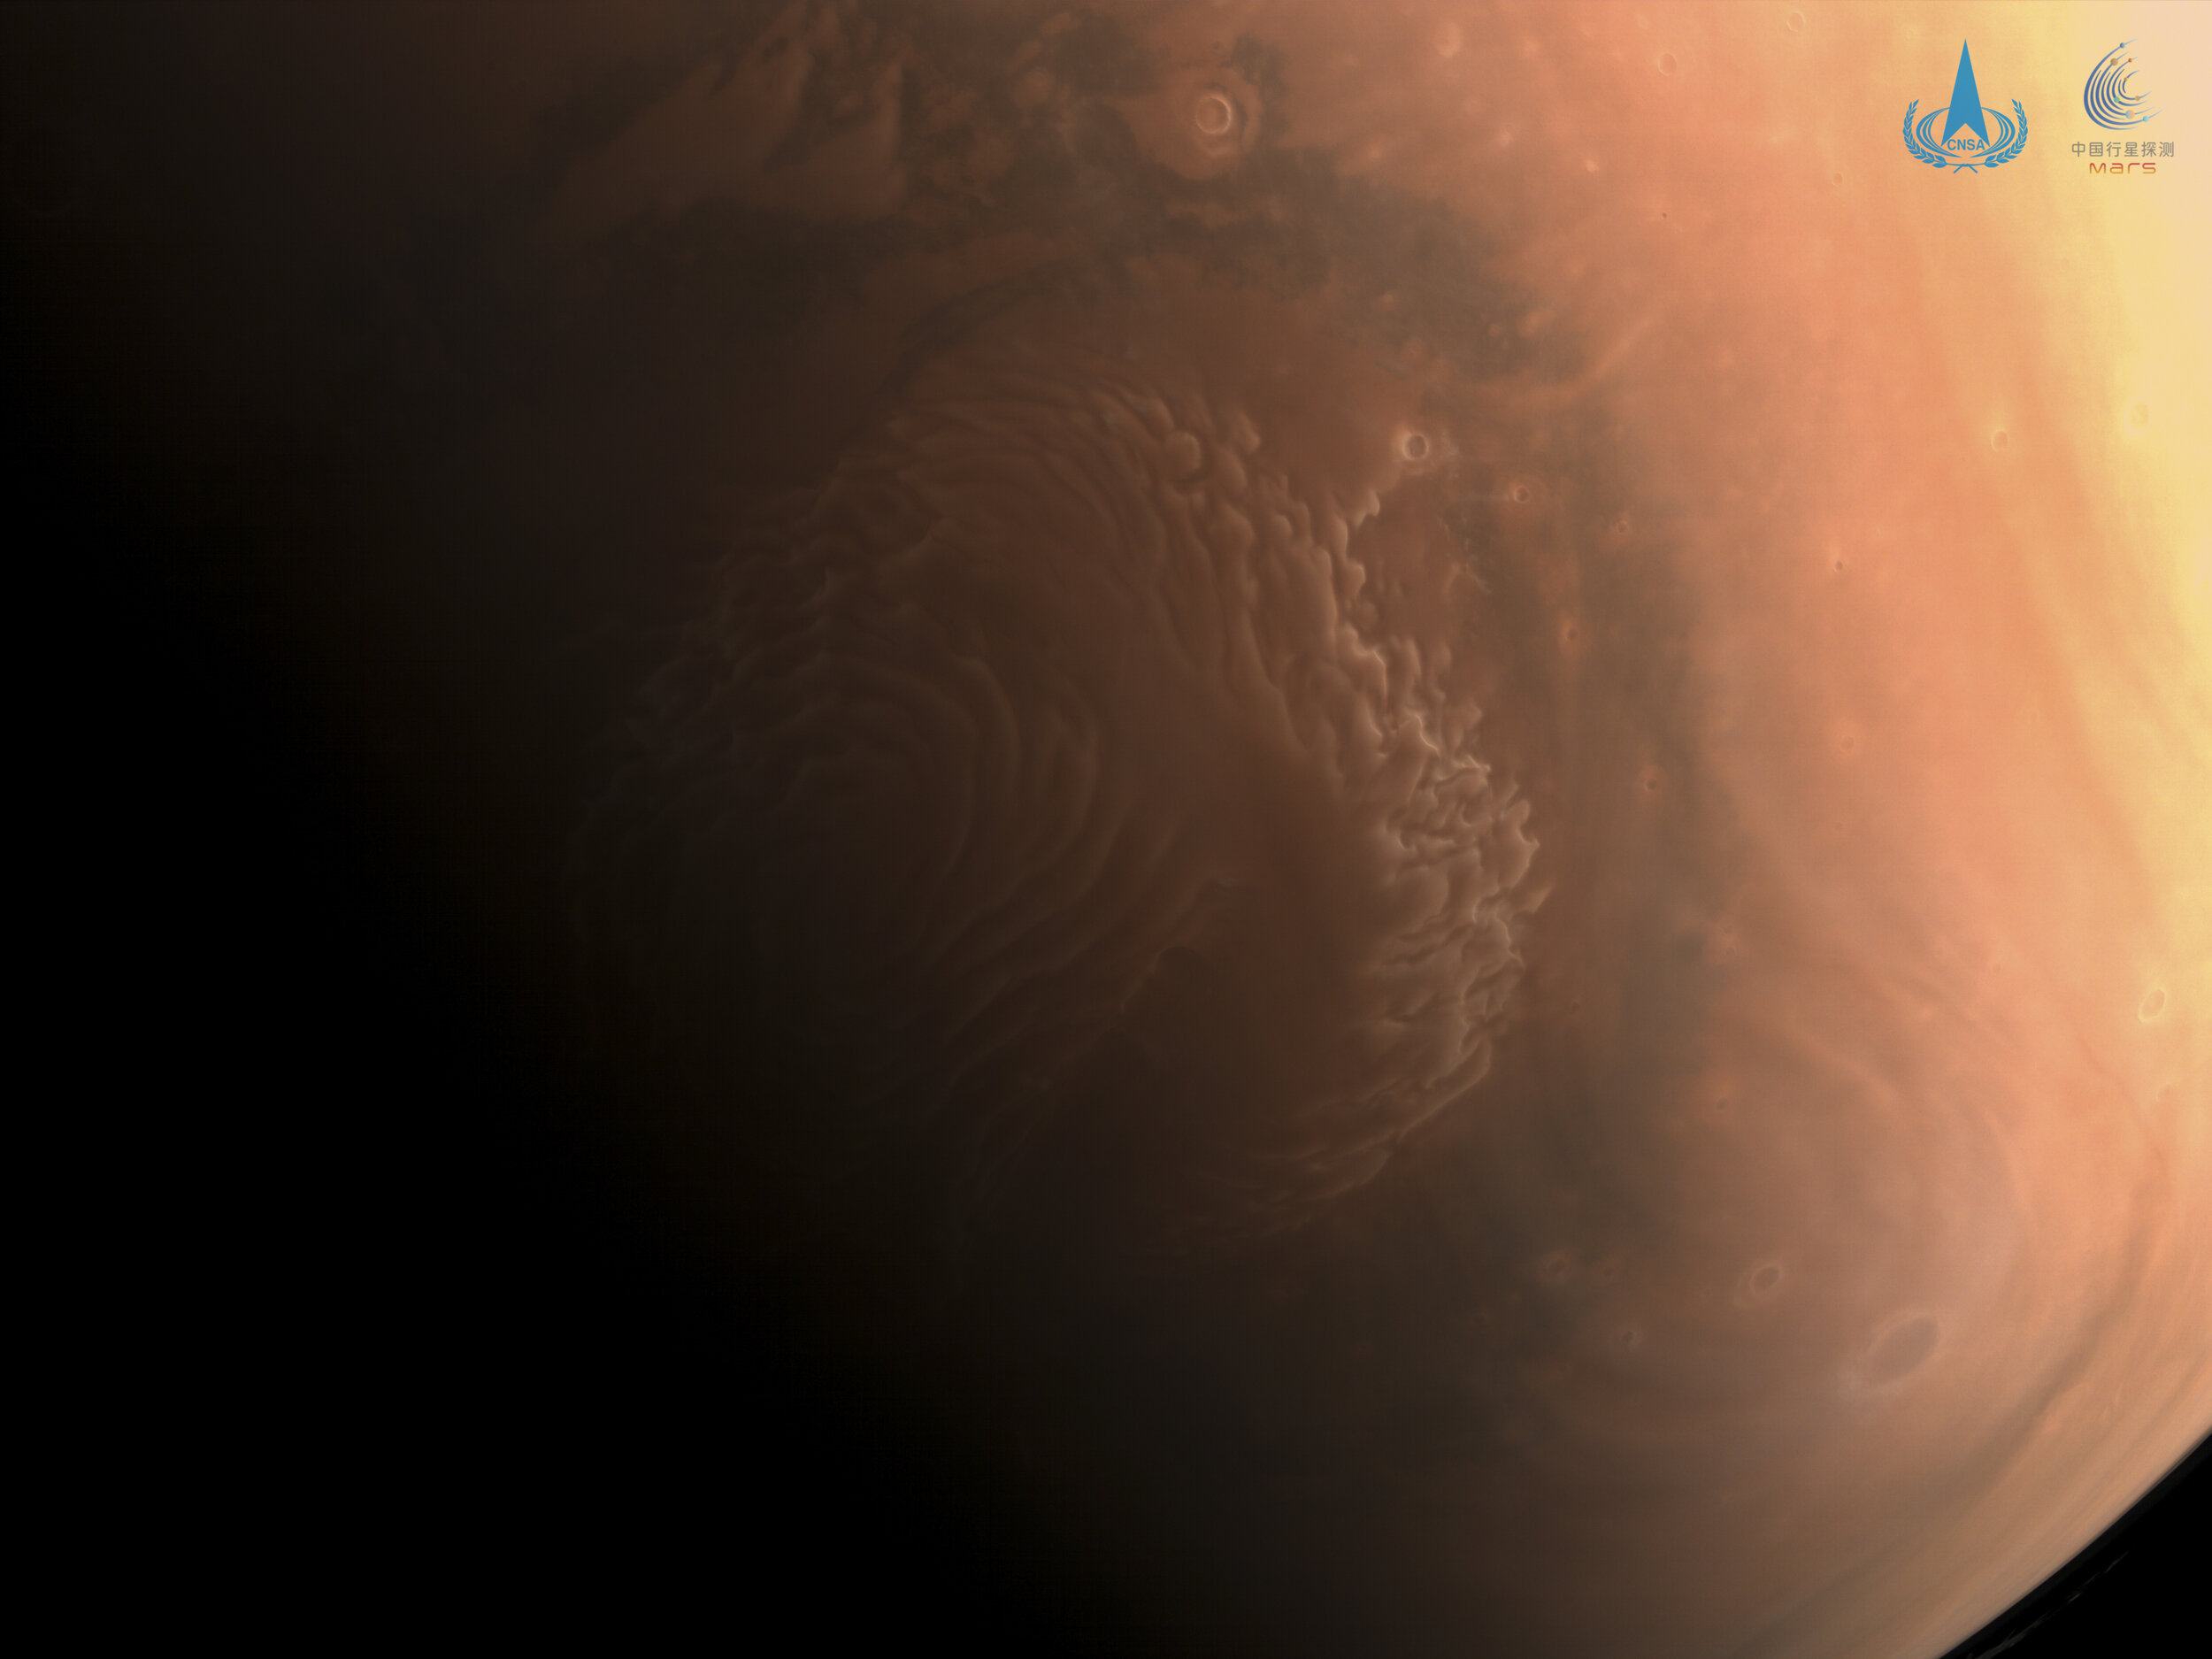 PICTURED: A medium-resolution of the Martian north pole taken from the Tianwen-1 orbiter craft. Photo credit: Chinese National Space Agency (CNSA) and Chinese Academy of Sciences (CAS)